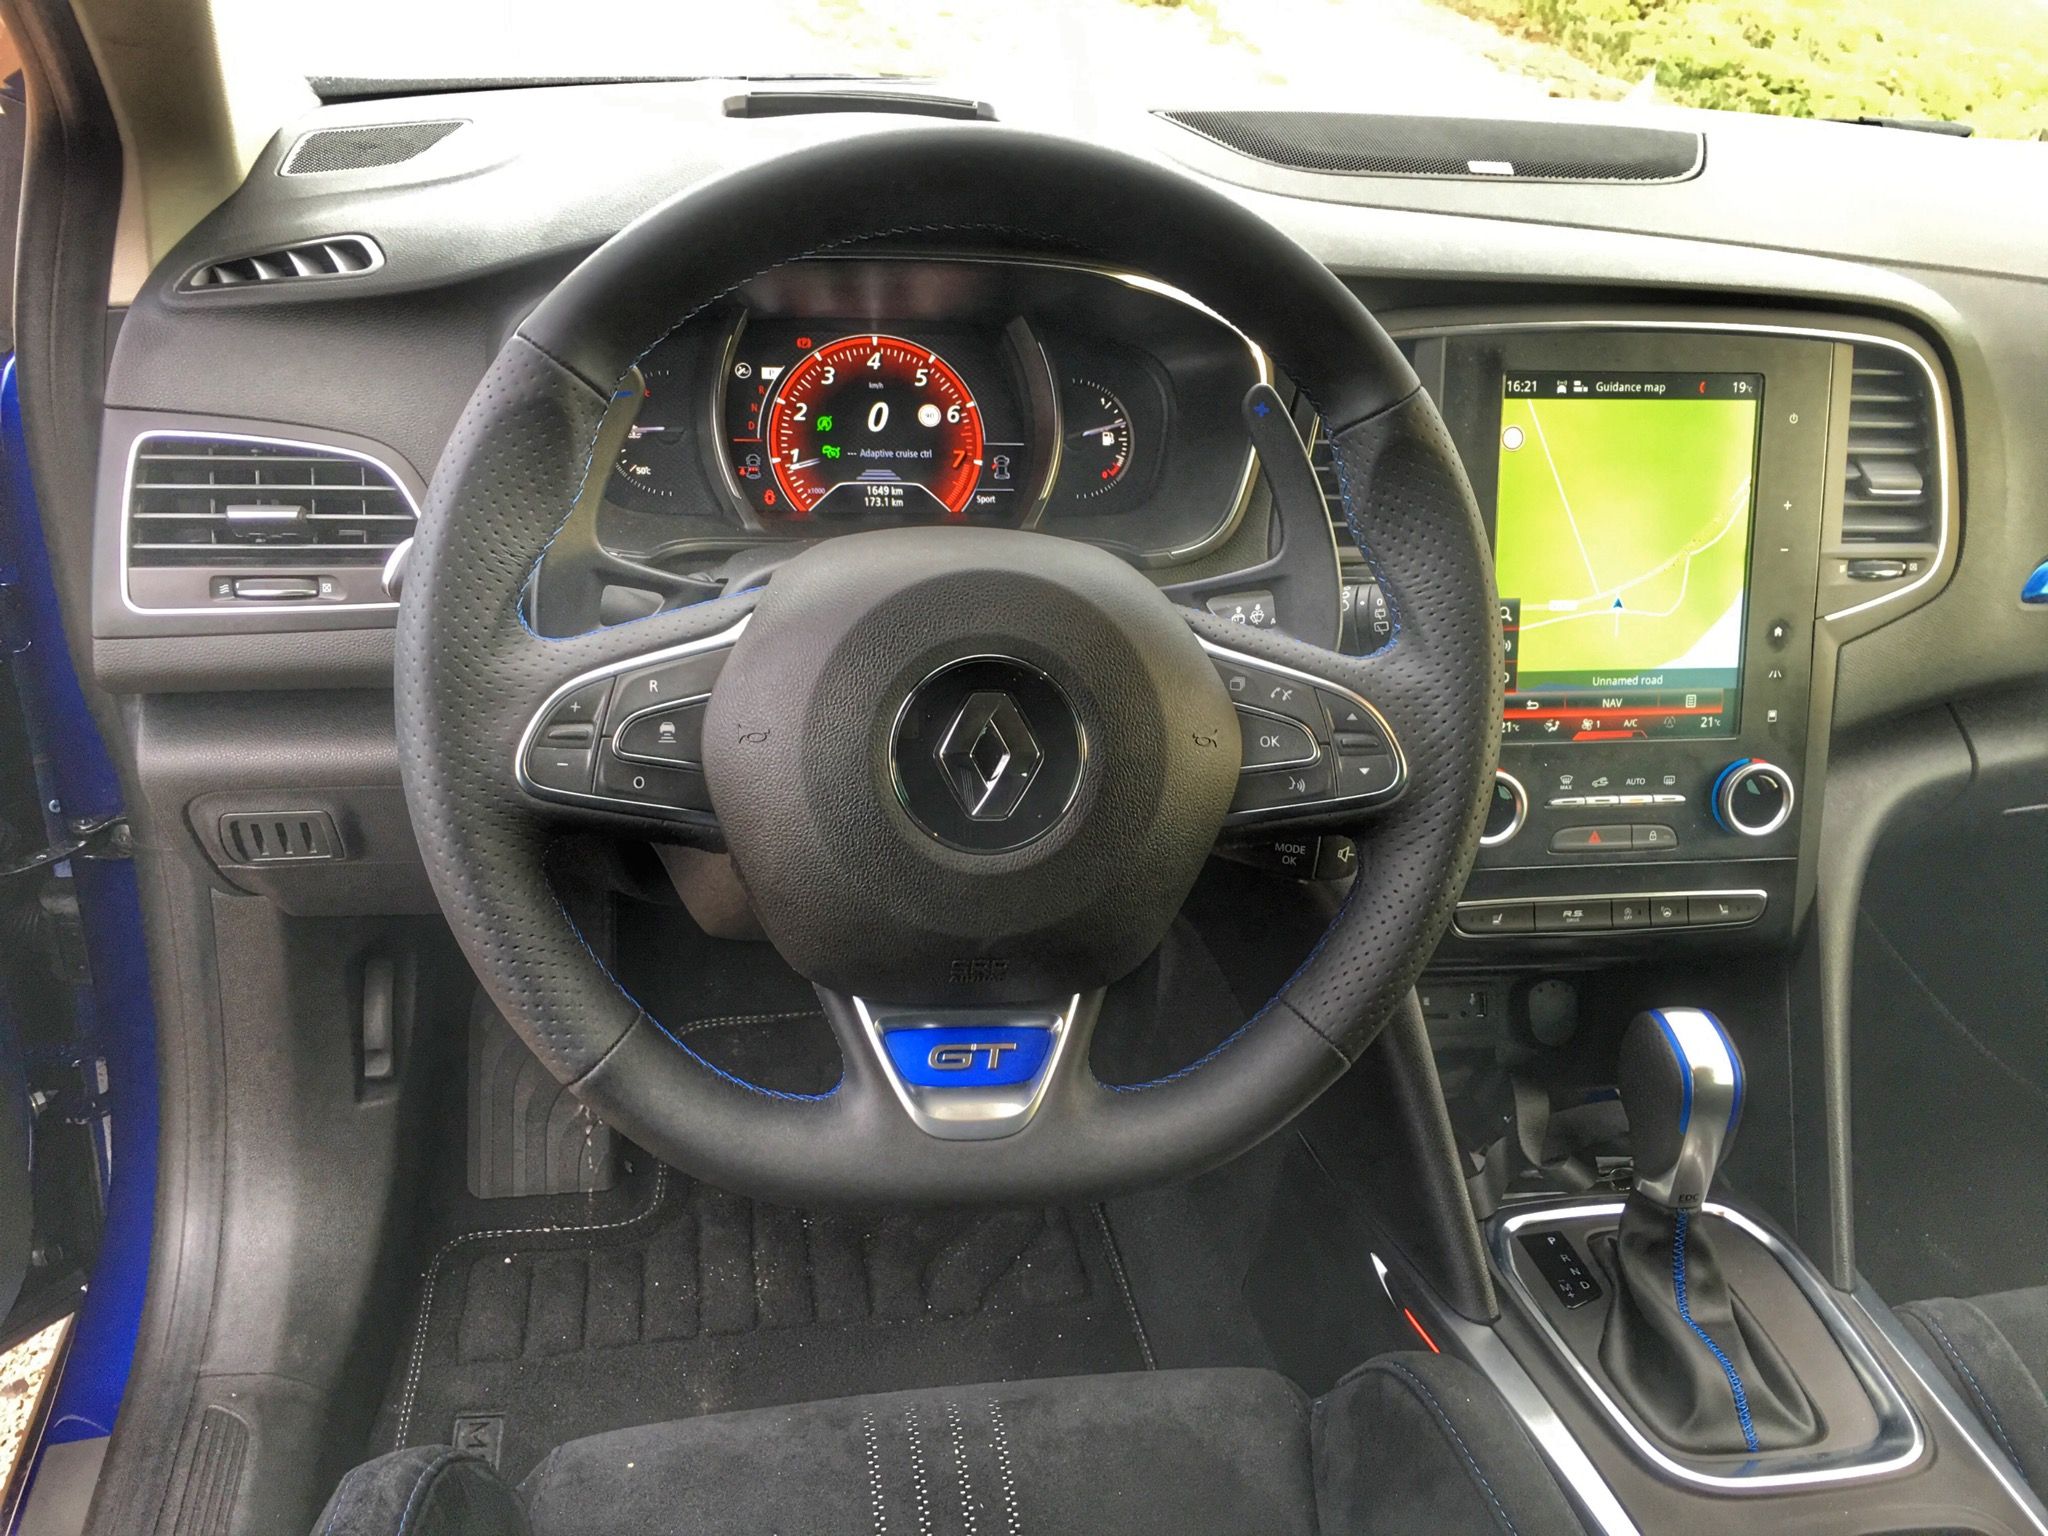 2016 Renault Megane Gt Streering And Dashboard (View 1 of 27)